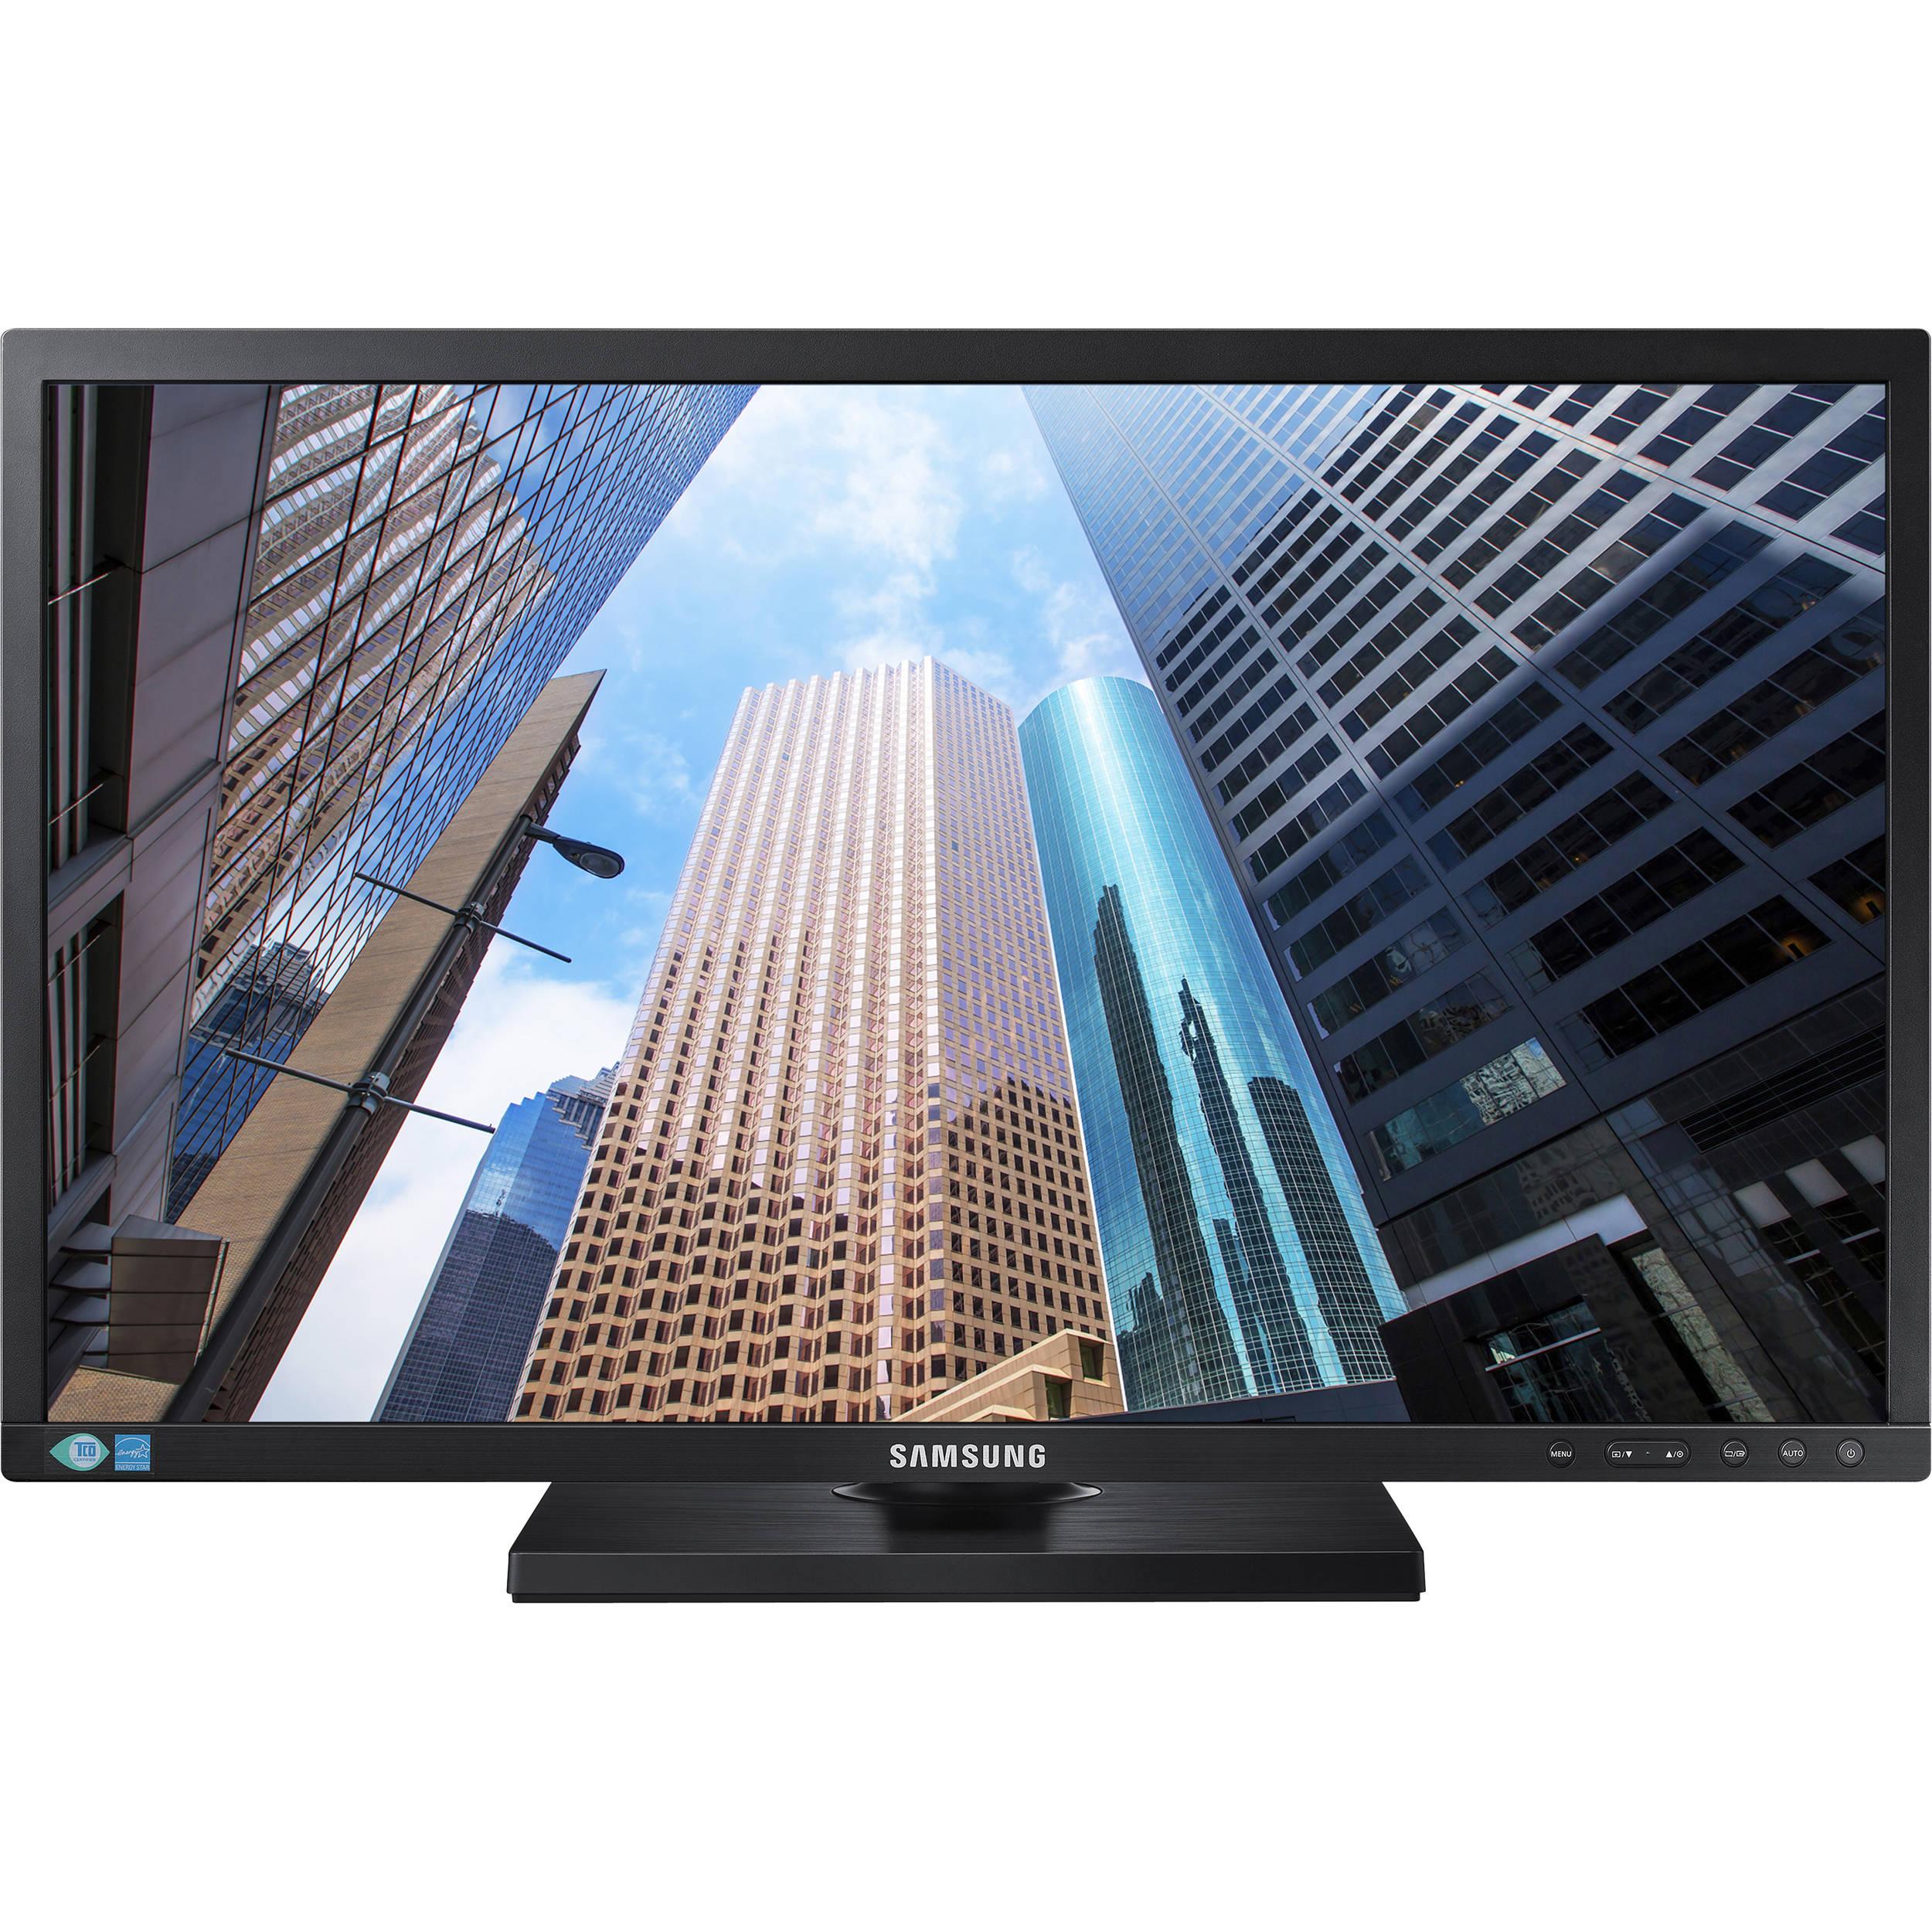 21.5in Samsung SE450 5ms LED Monitor for $59.99 Shipped